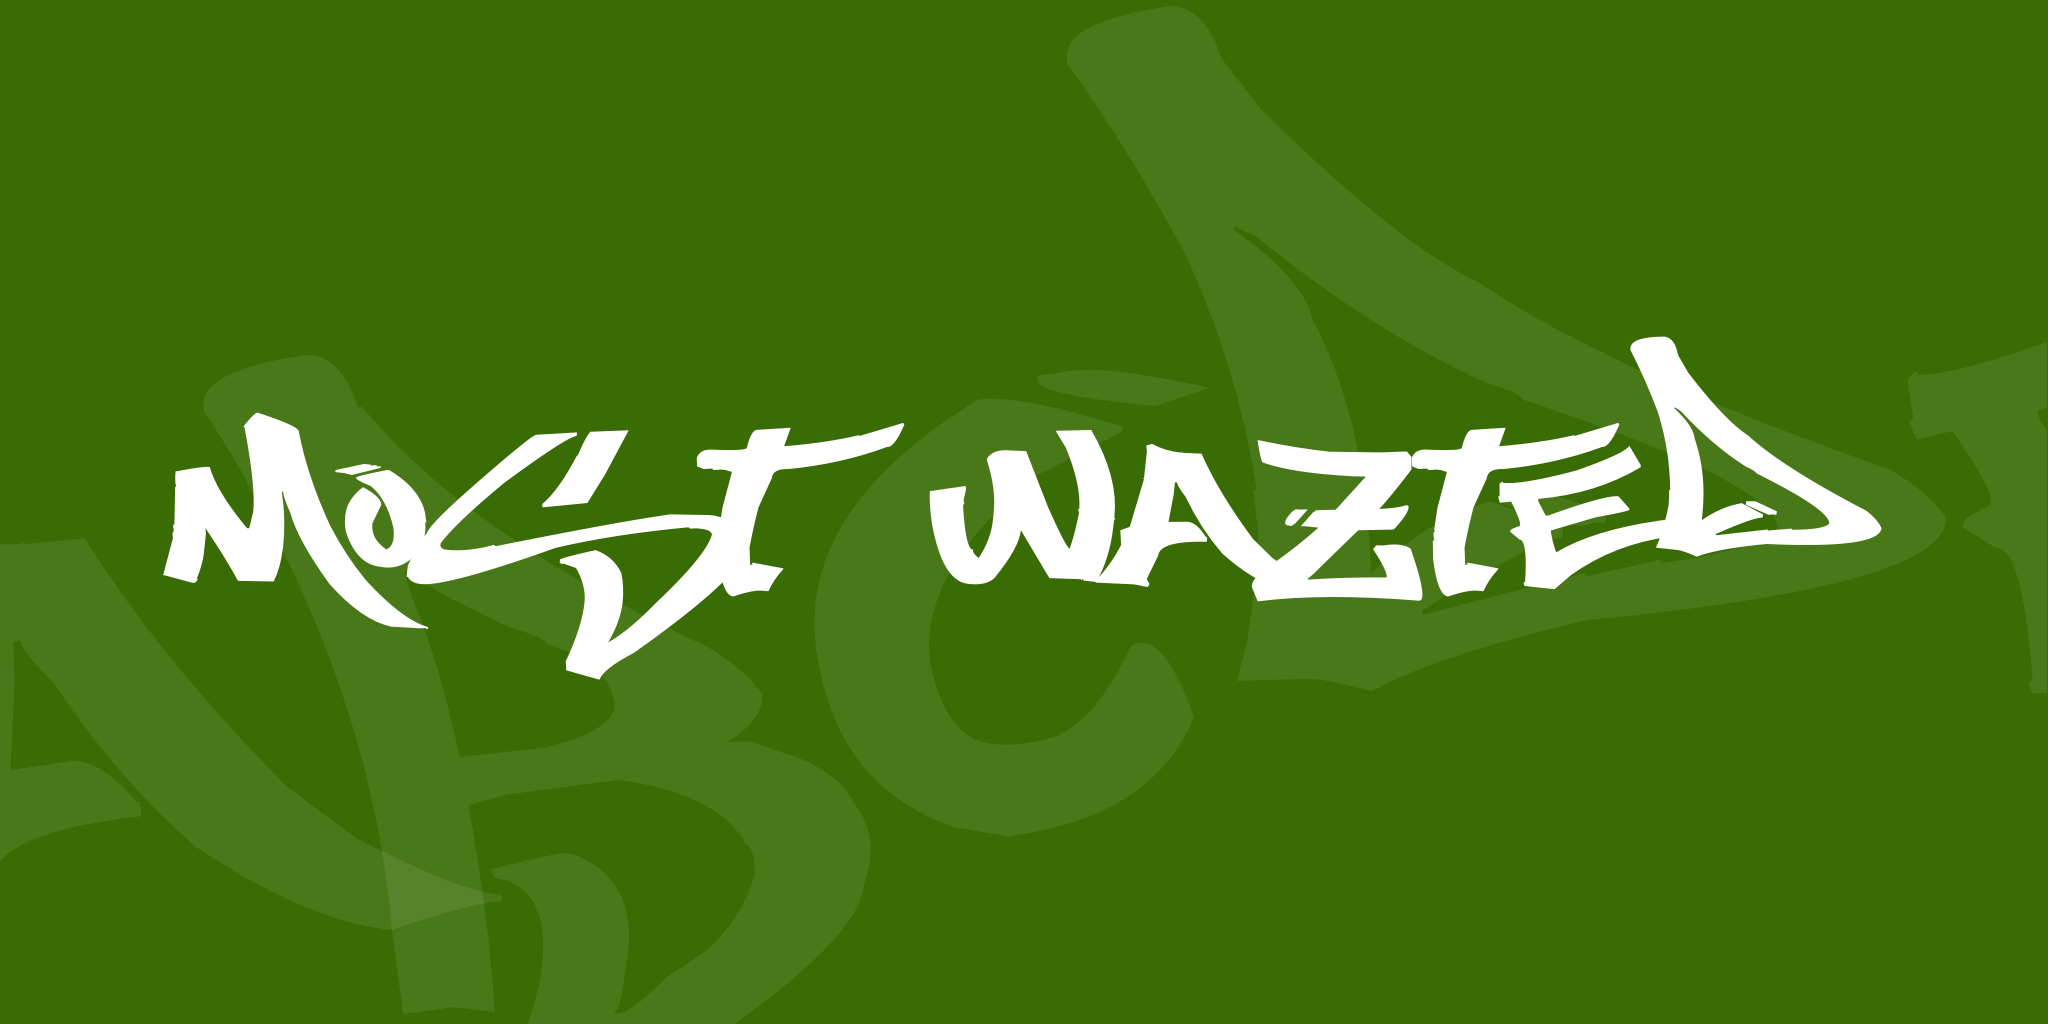 Most Wazted